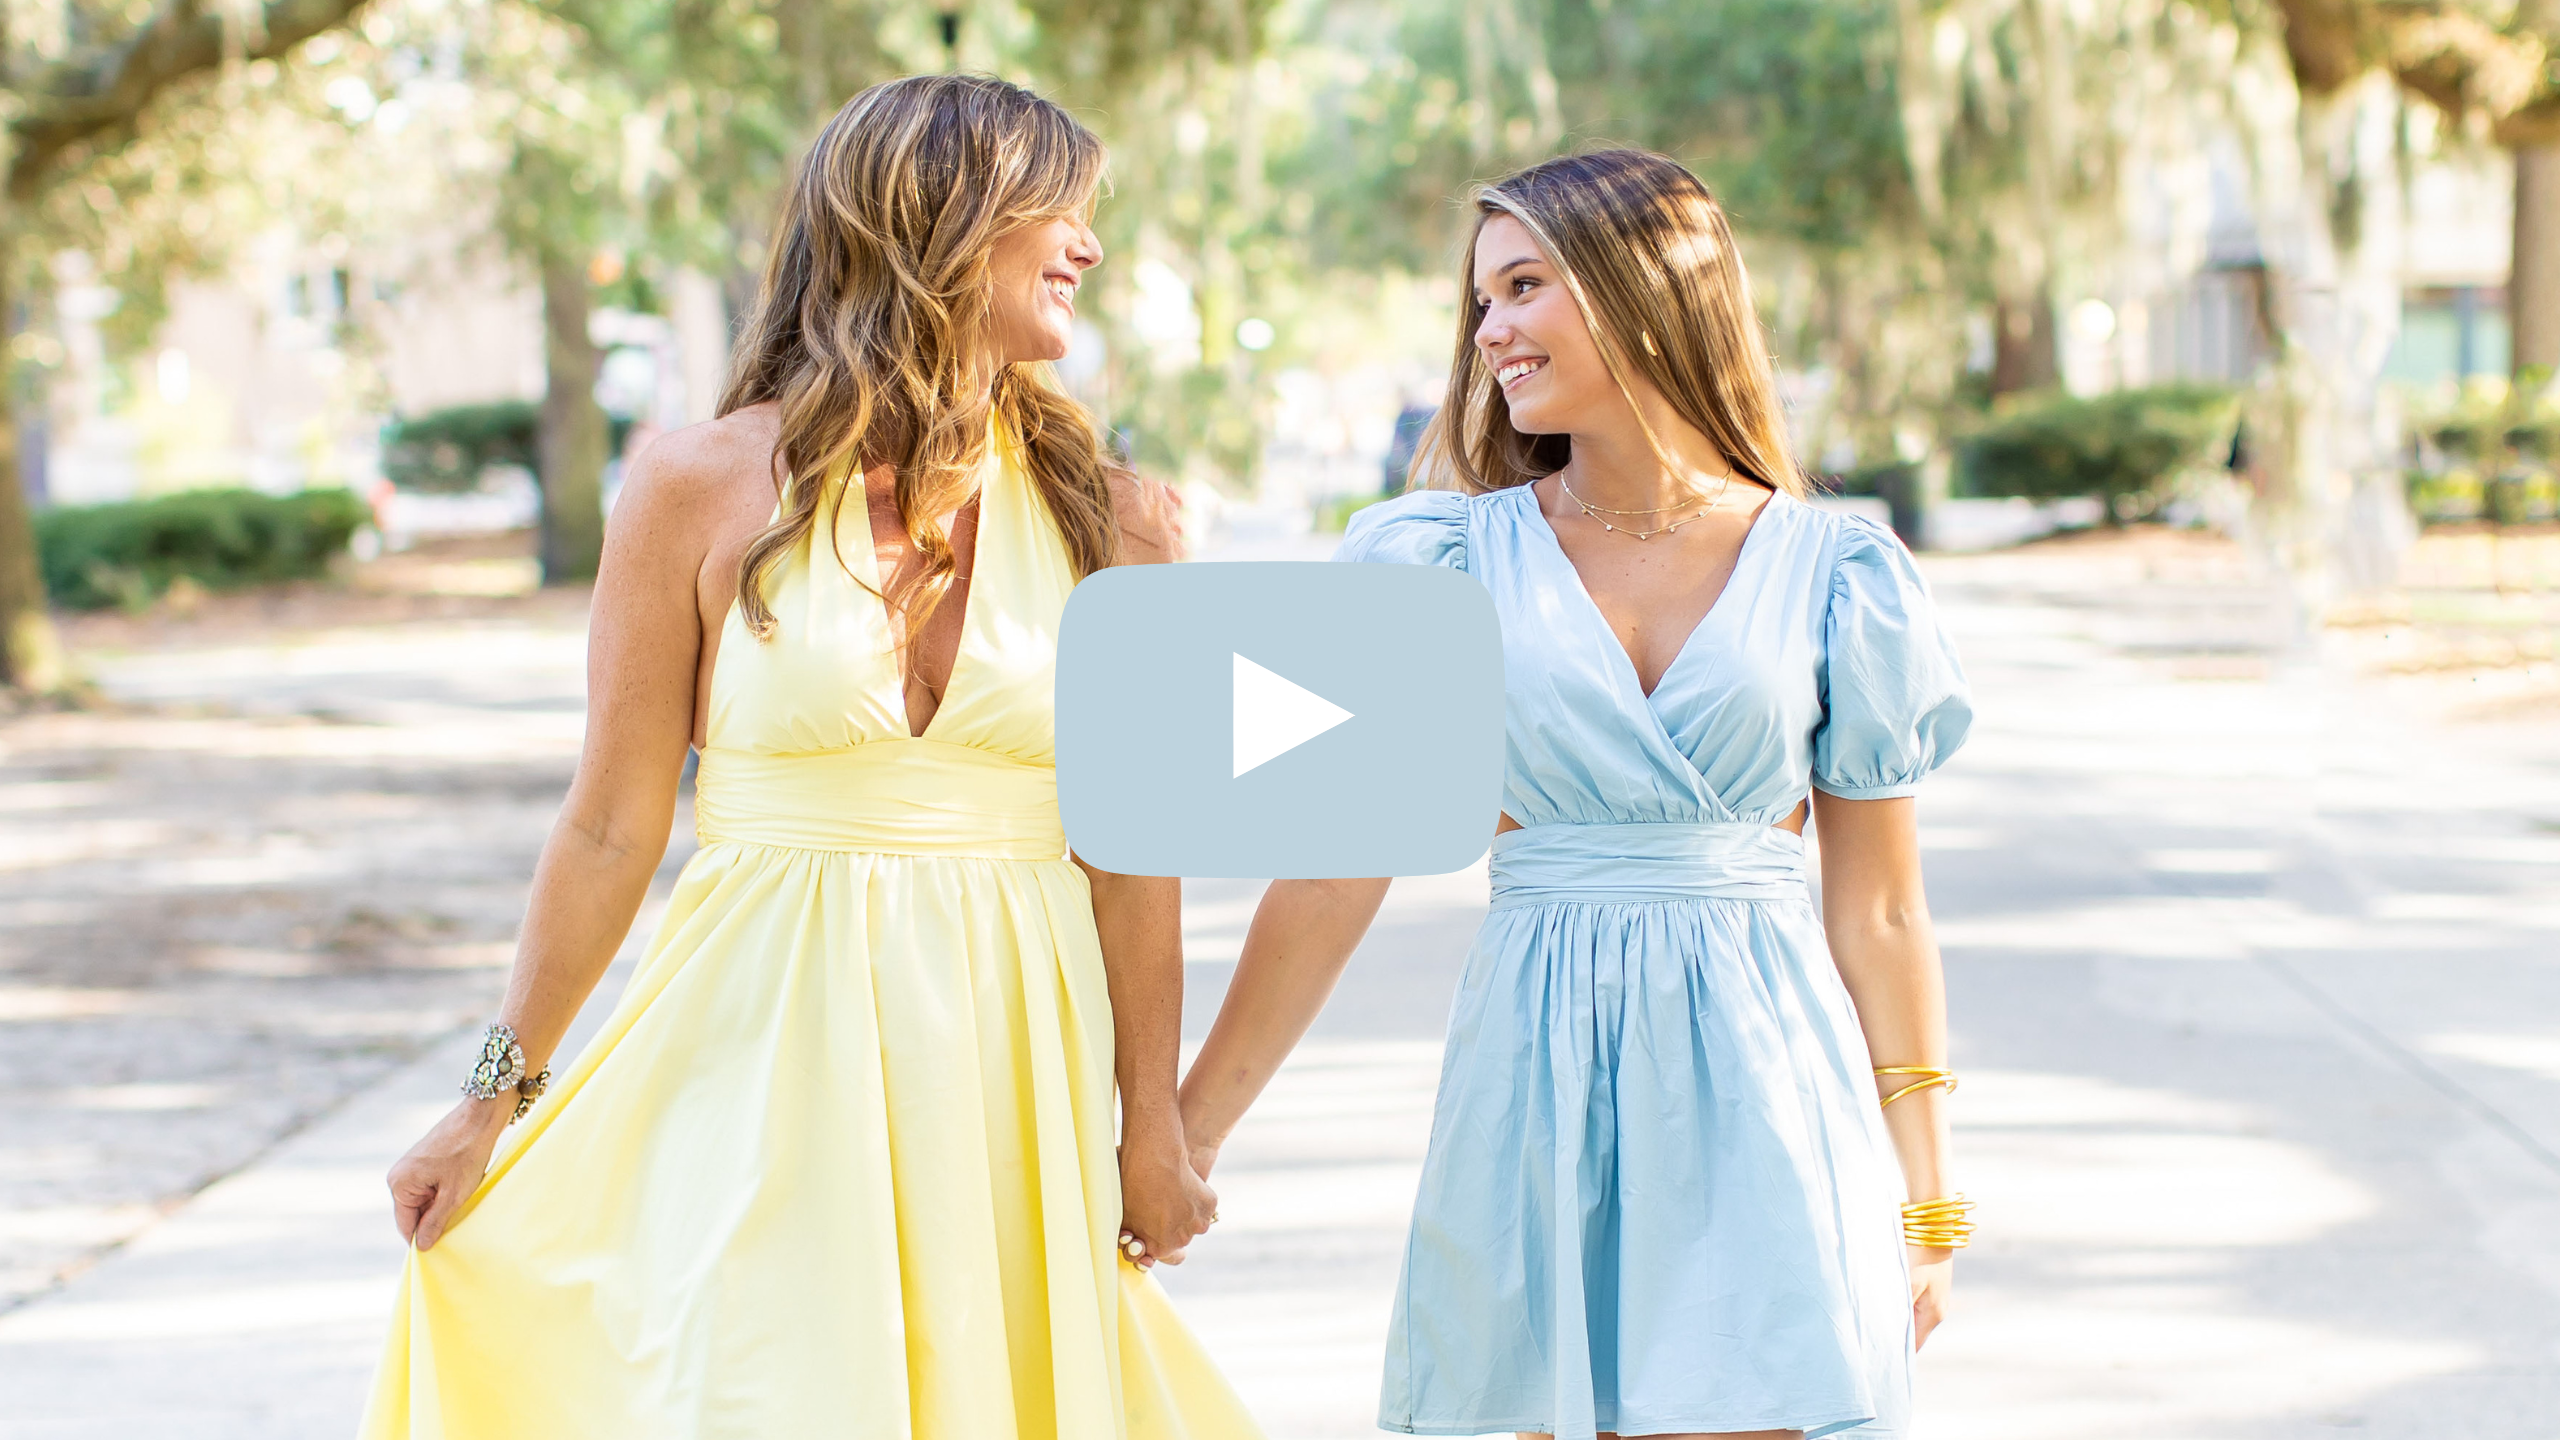 Posing Senior Portraits with their Friends (REAL shoot!) | Hope Taylor Photography